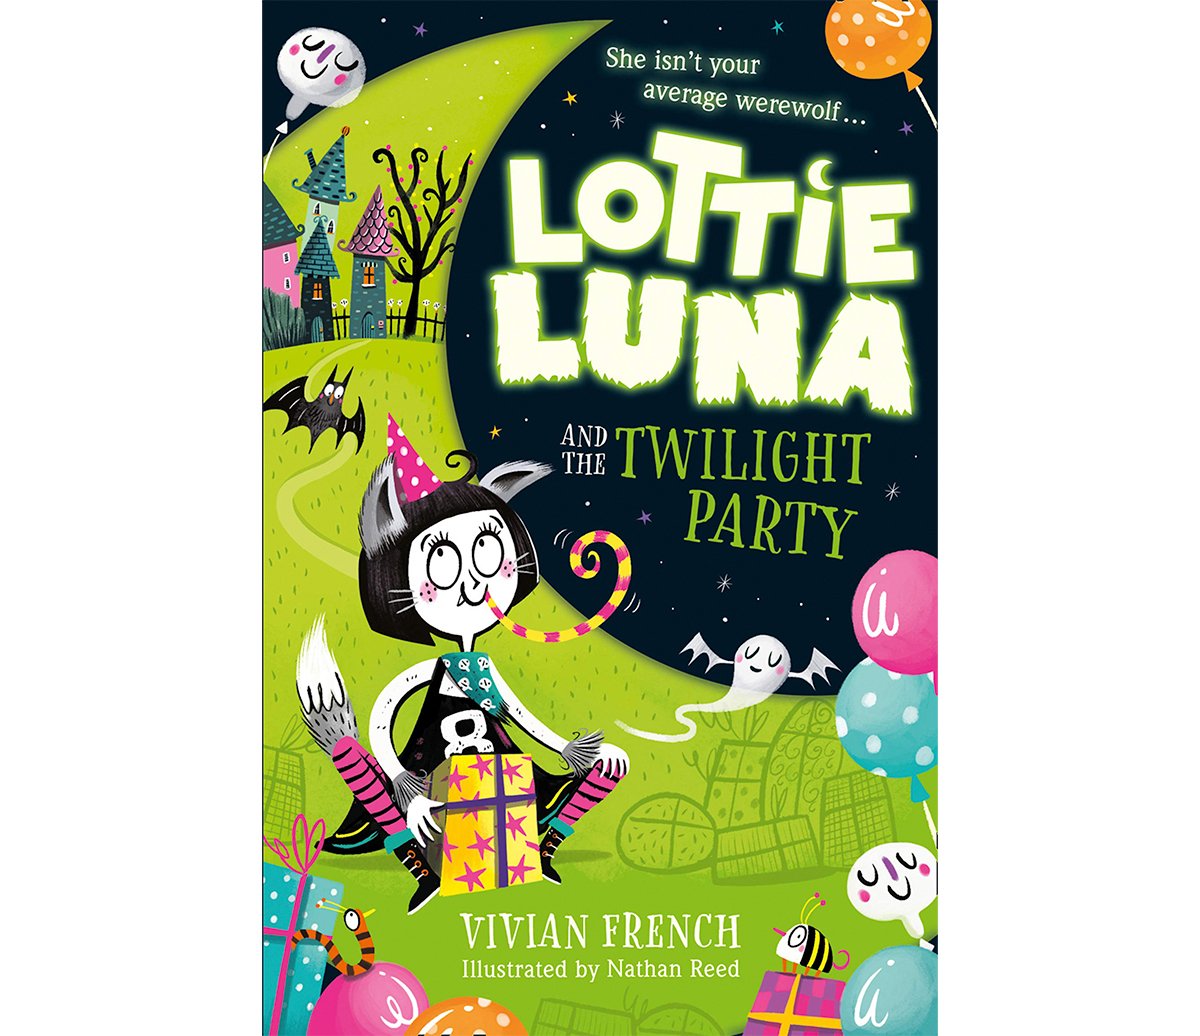 nathan-reed-lottie-luna-cover.jpg